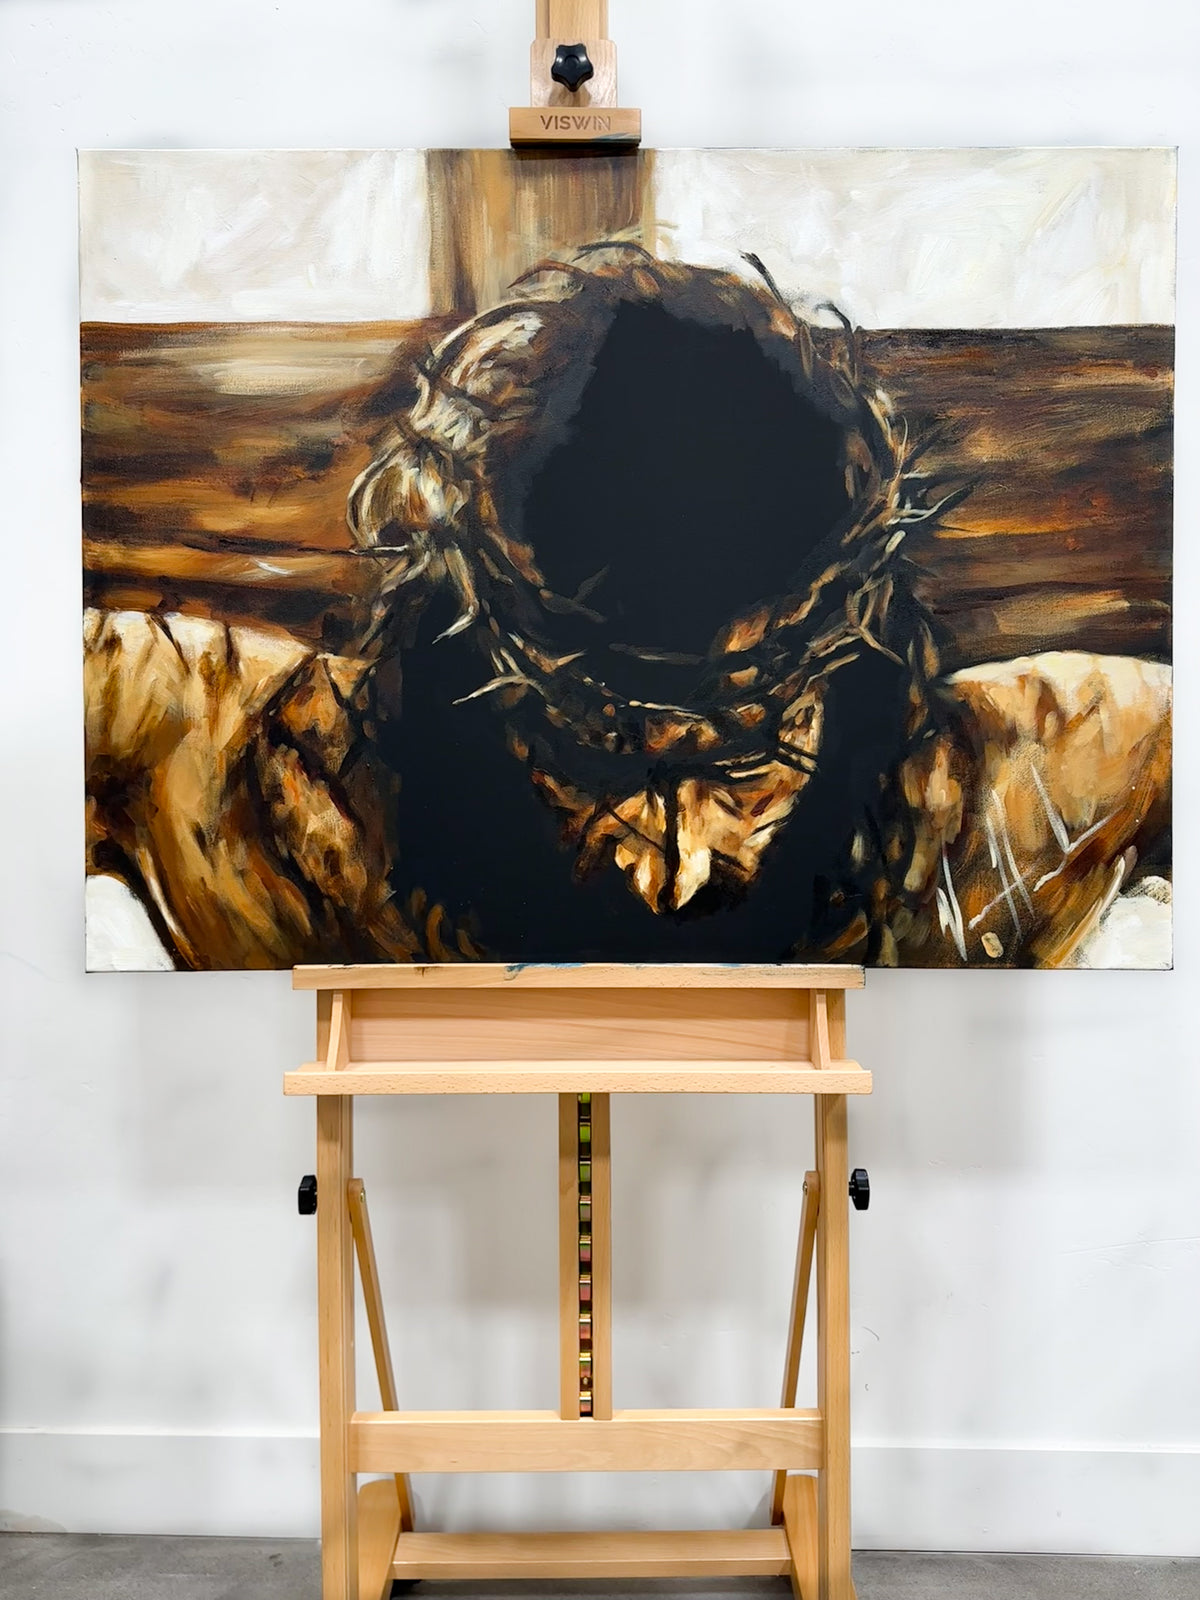 The Finished Work of the Cross - 30”x40” Original Painting